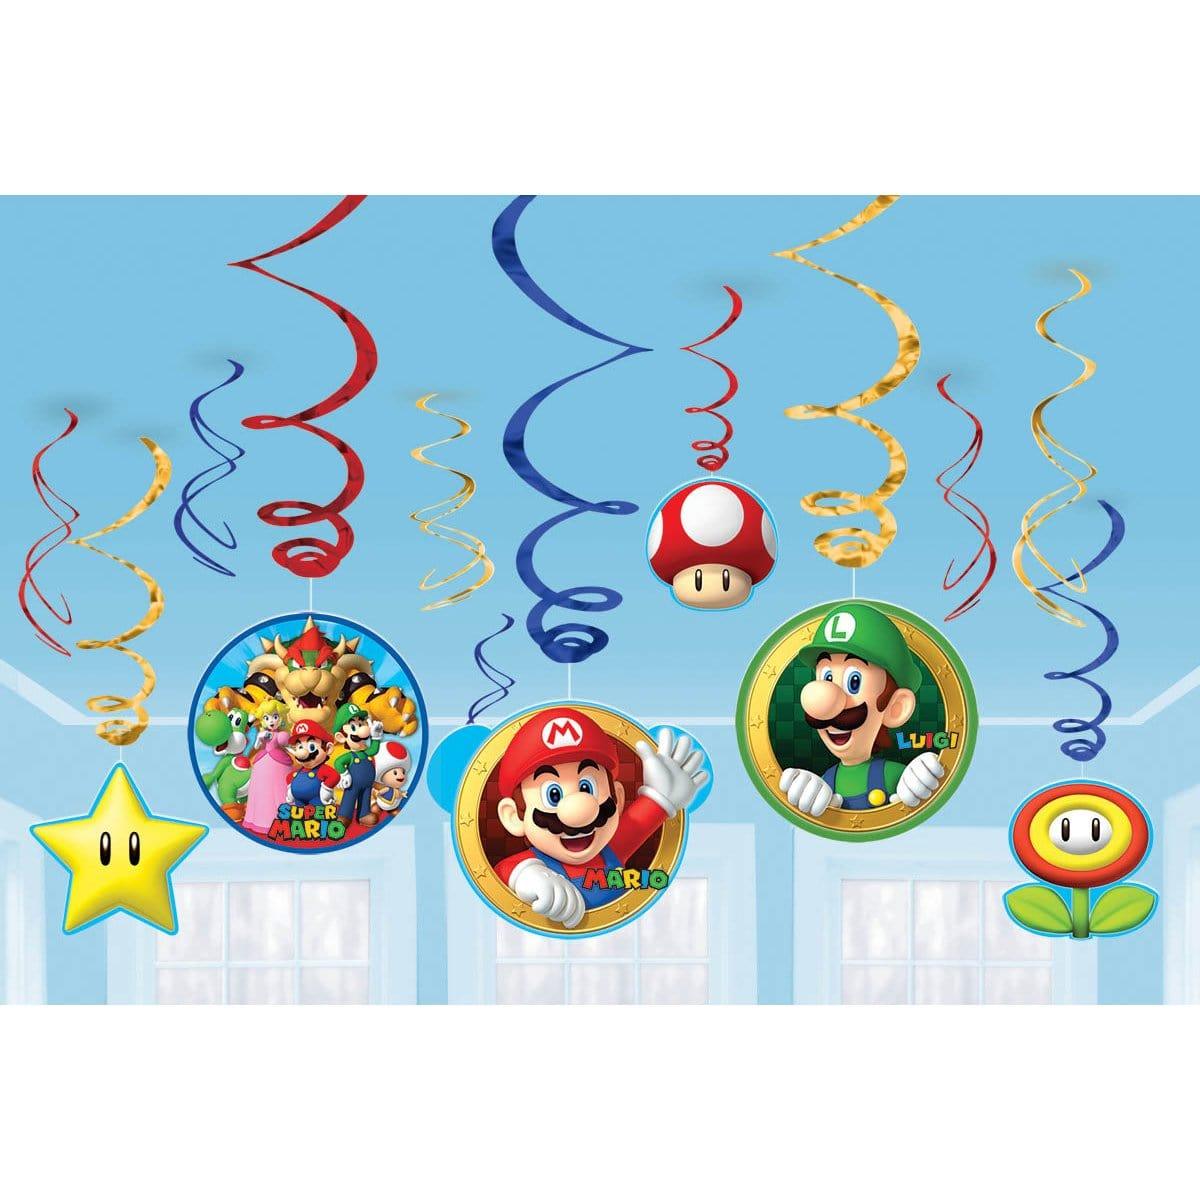 Buy Kids Birthday Super Mario swirl decorations, 12 per package sold at Party Expert